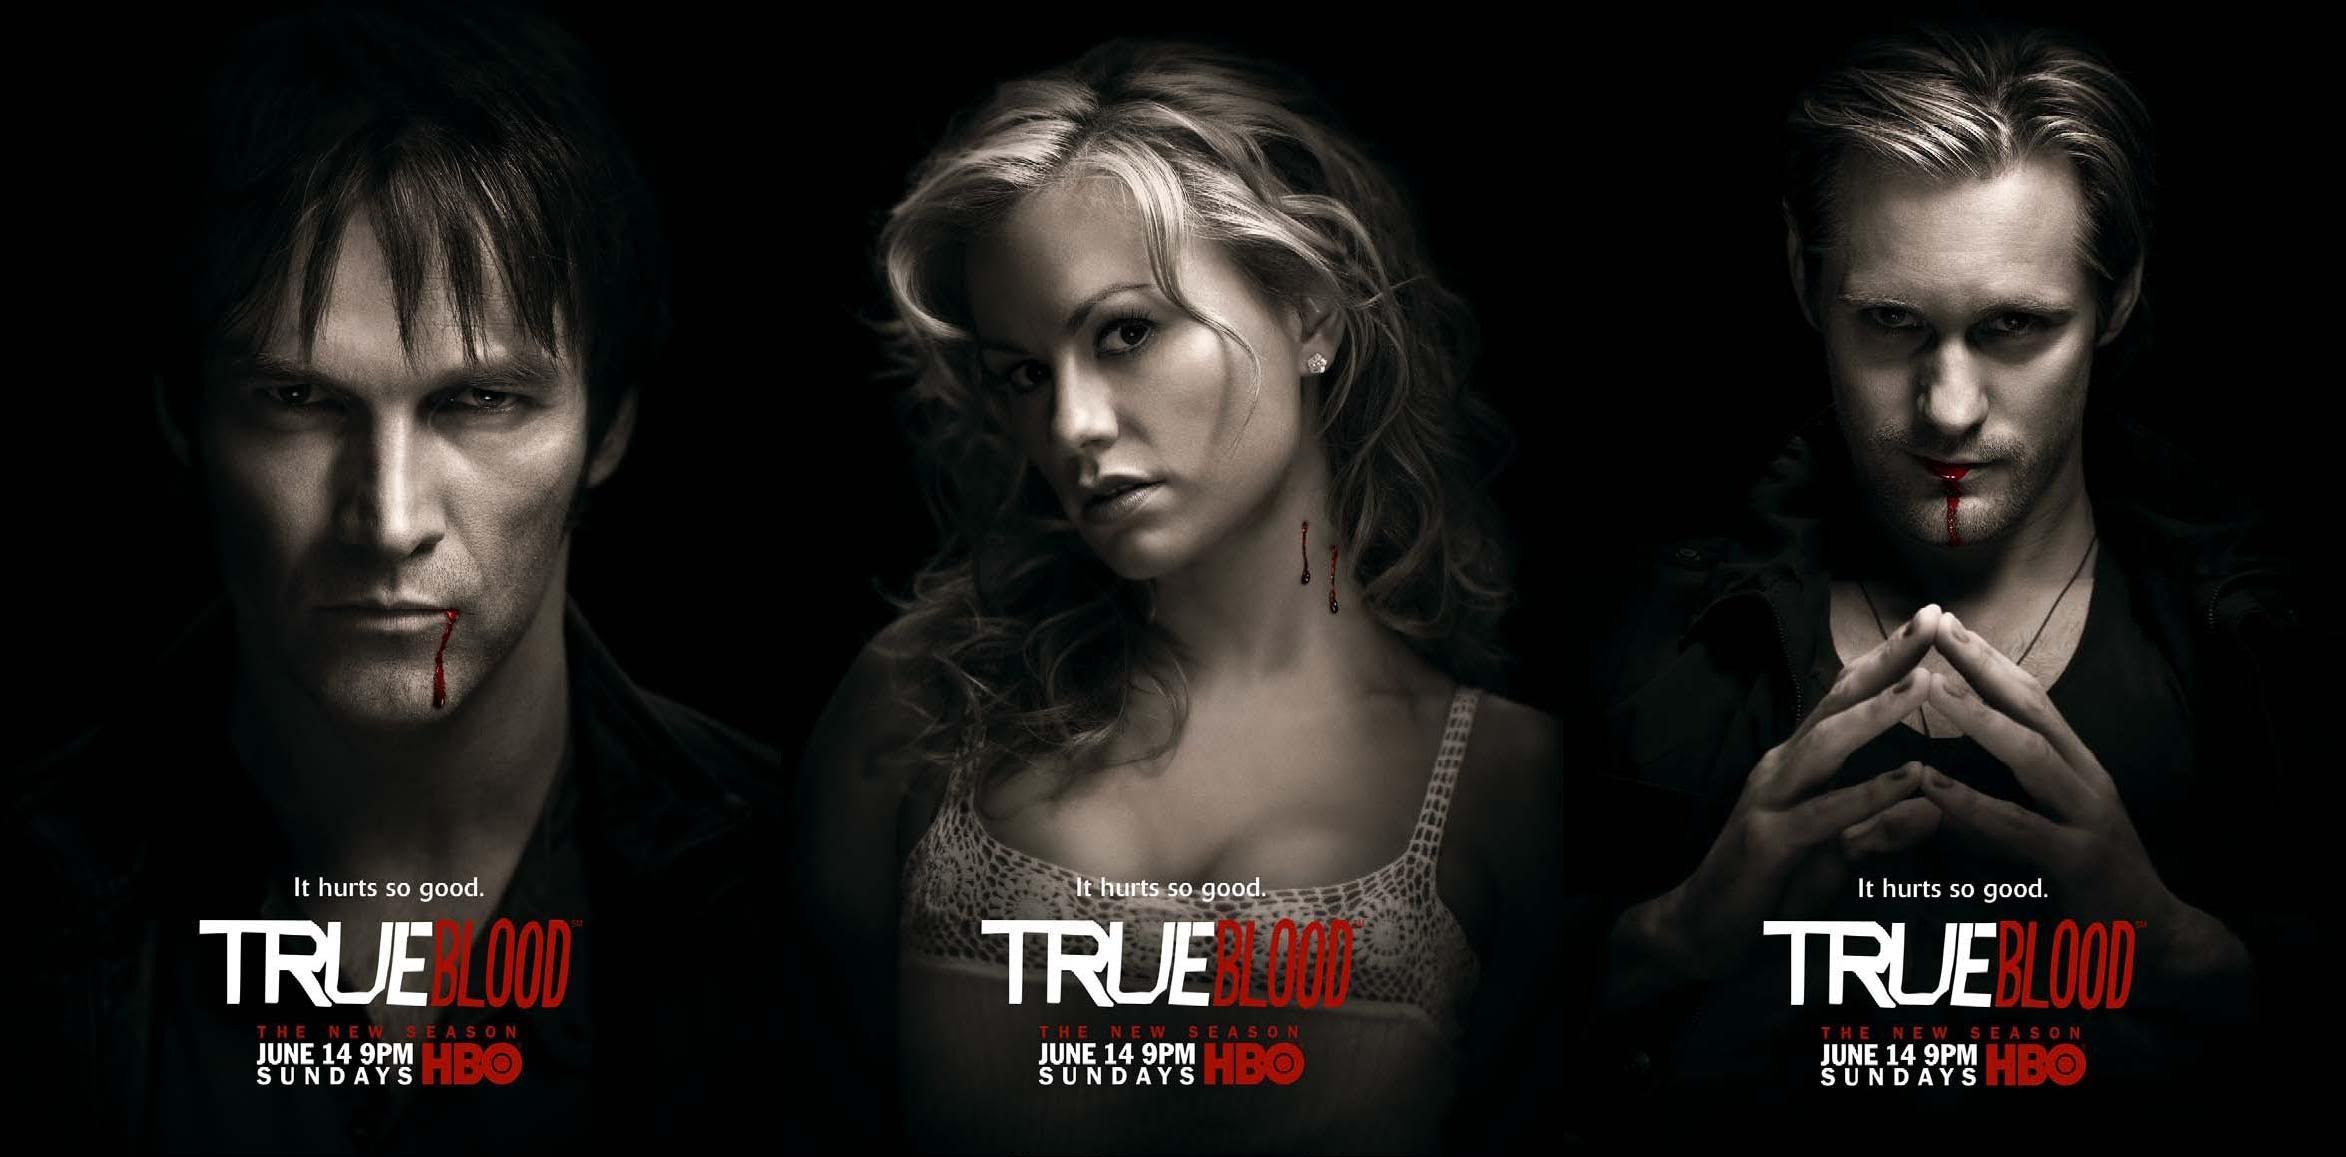 true blood wallpaper,movie,games,poster,darkness,fictional character